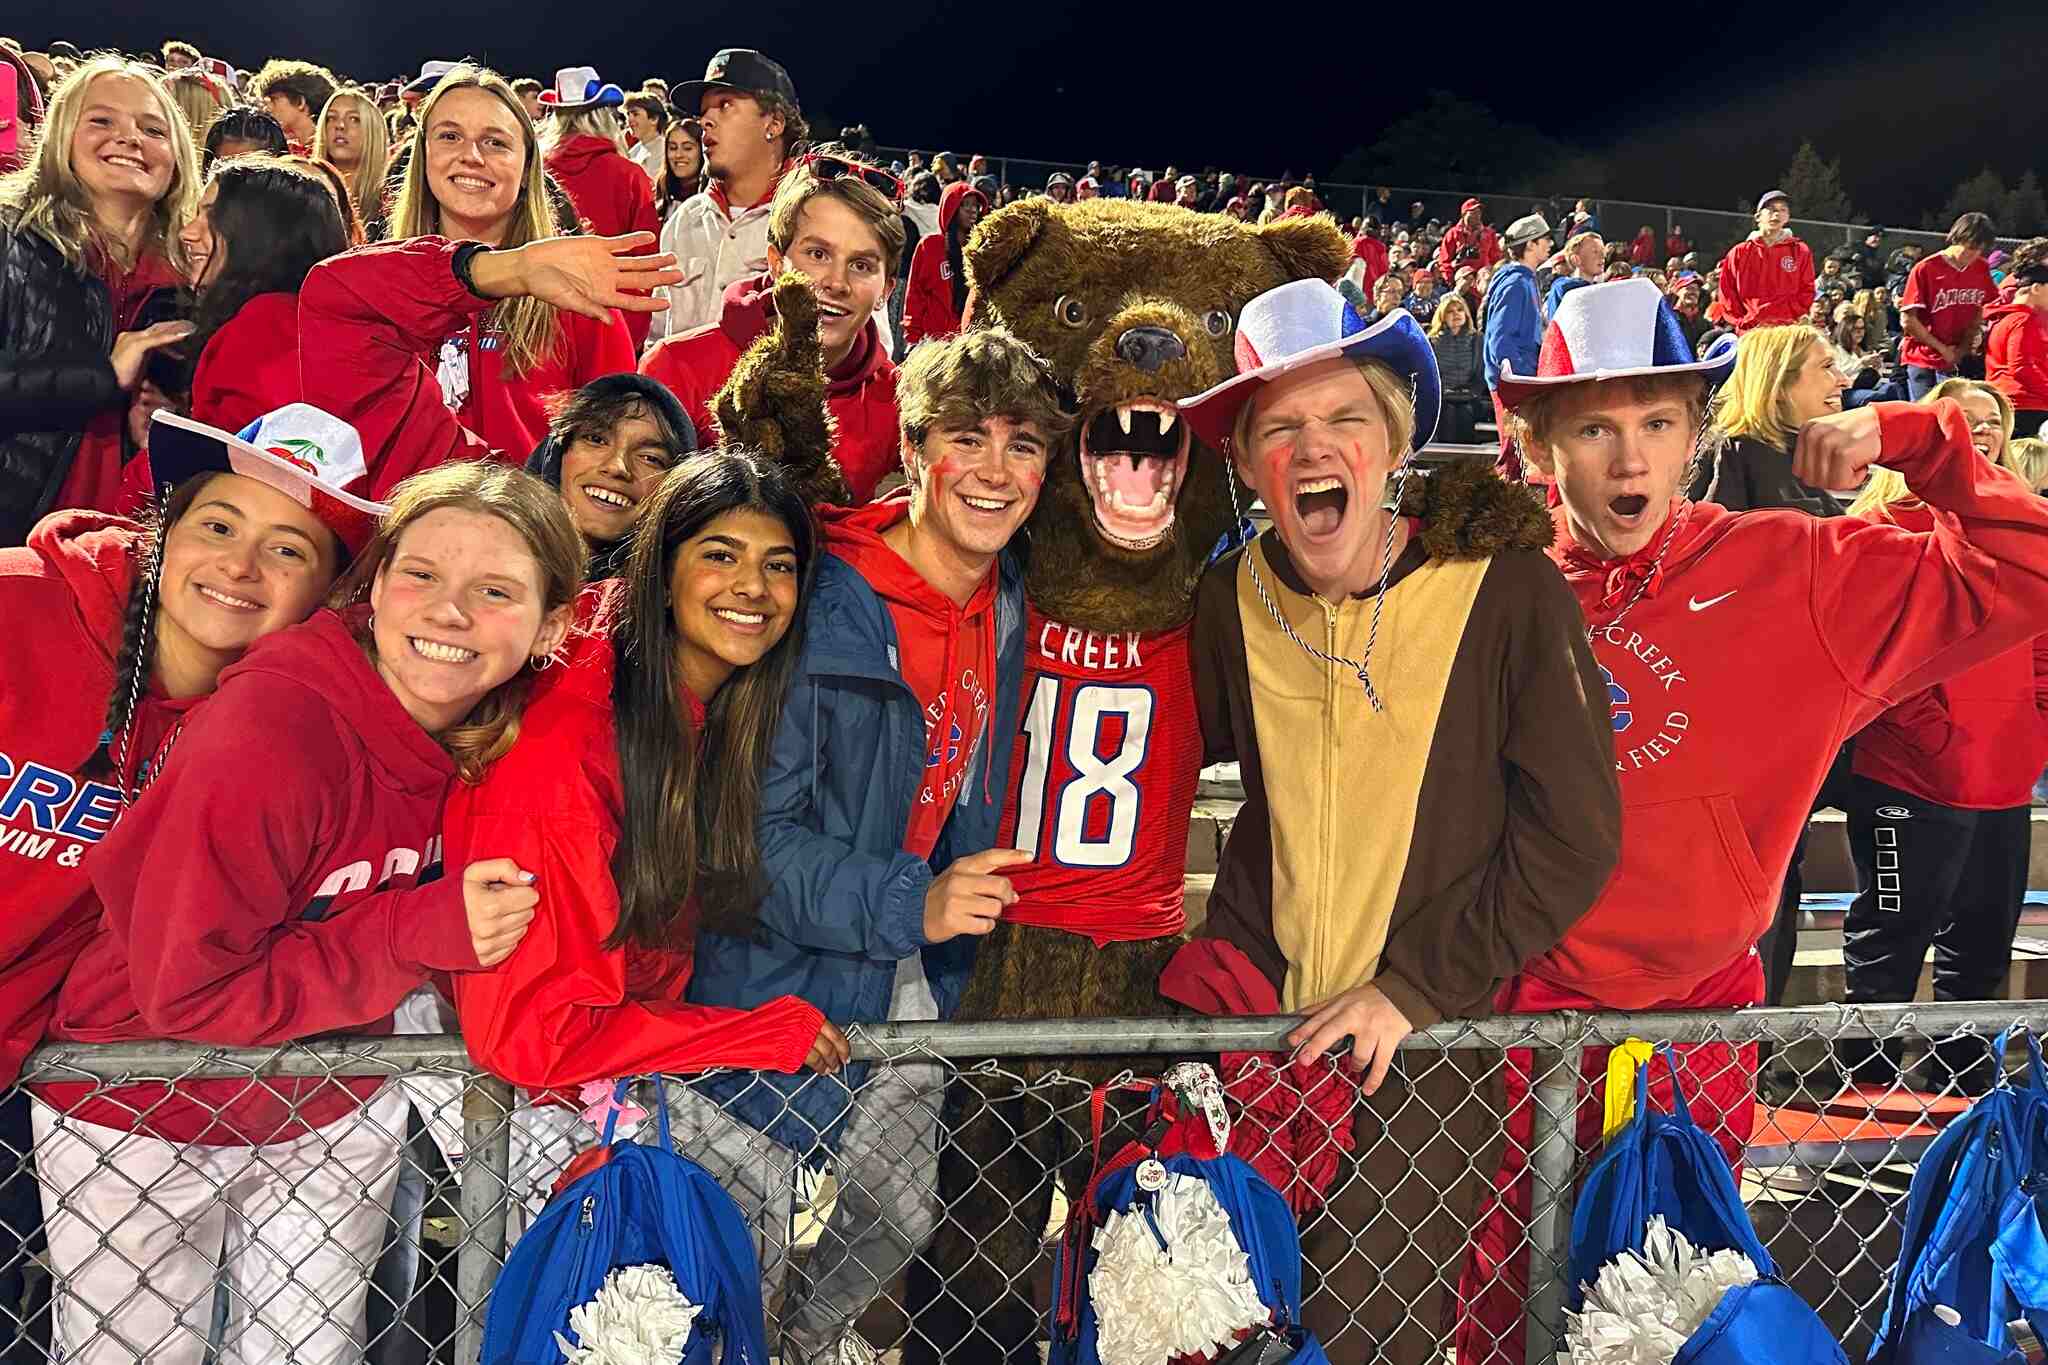 Crowd at a Cherry Creek High School football game in Colorado.